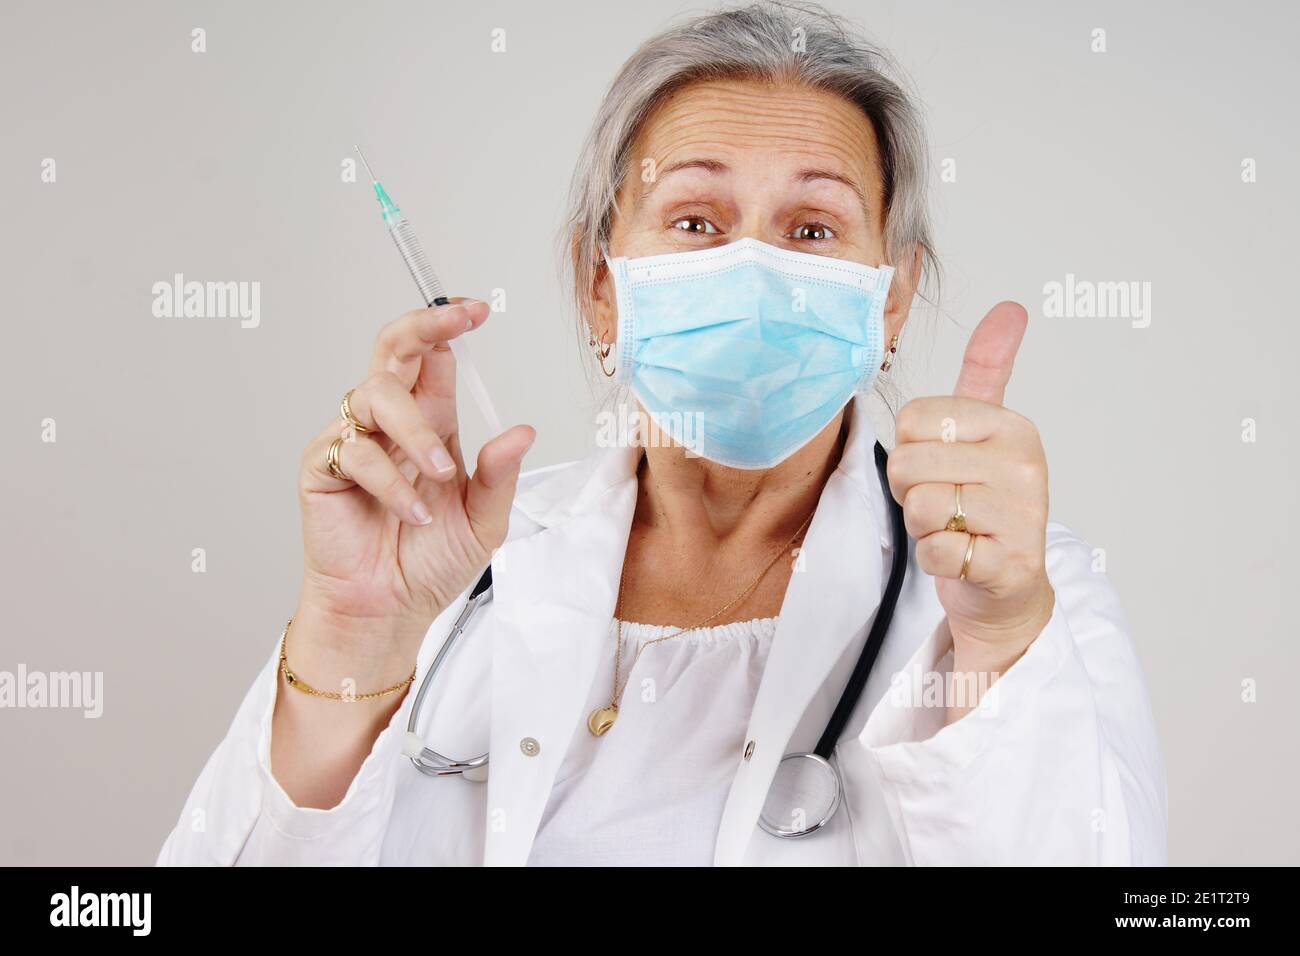 Relieved healthcare worker doctor or nurse with COVID vaccine concept Stock Photo